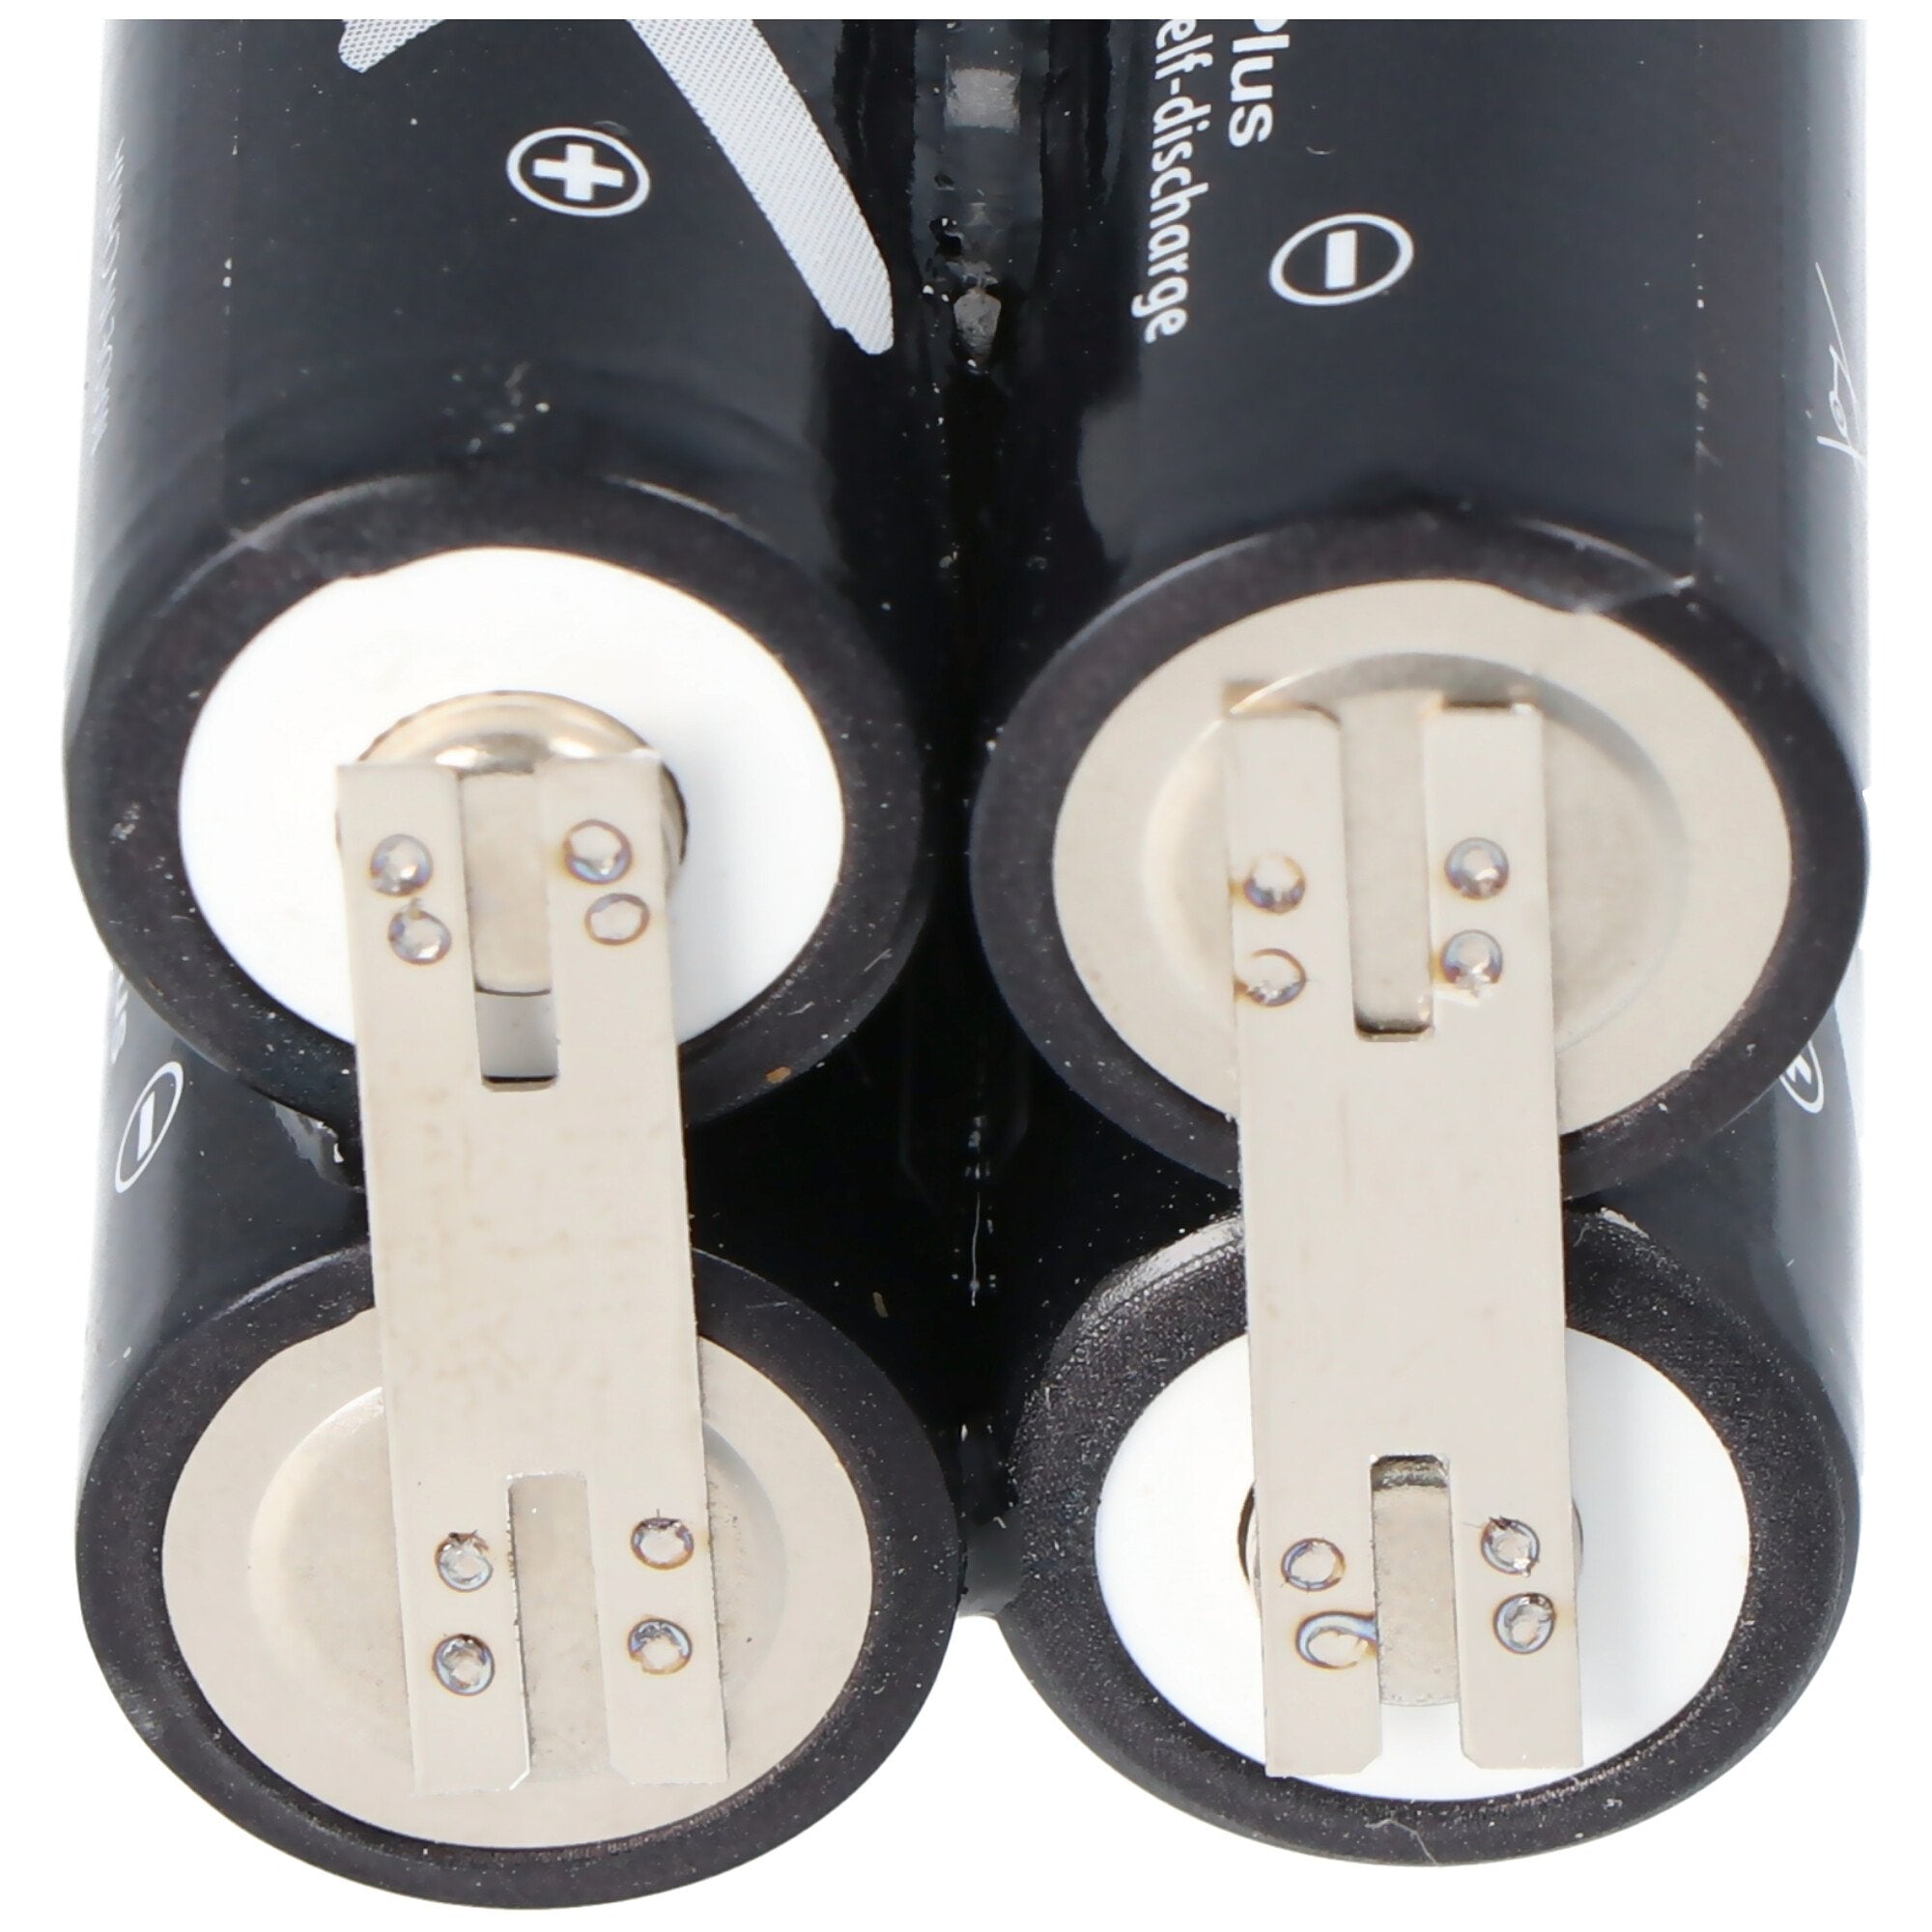 4 x APFT2100-1 4-cube Ni-MH Mignon AA battery pack 4.8 volts